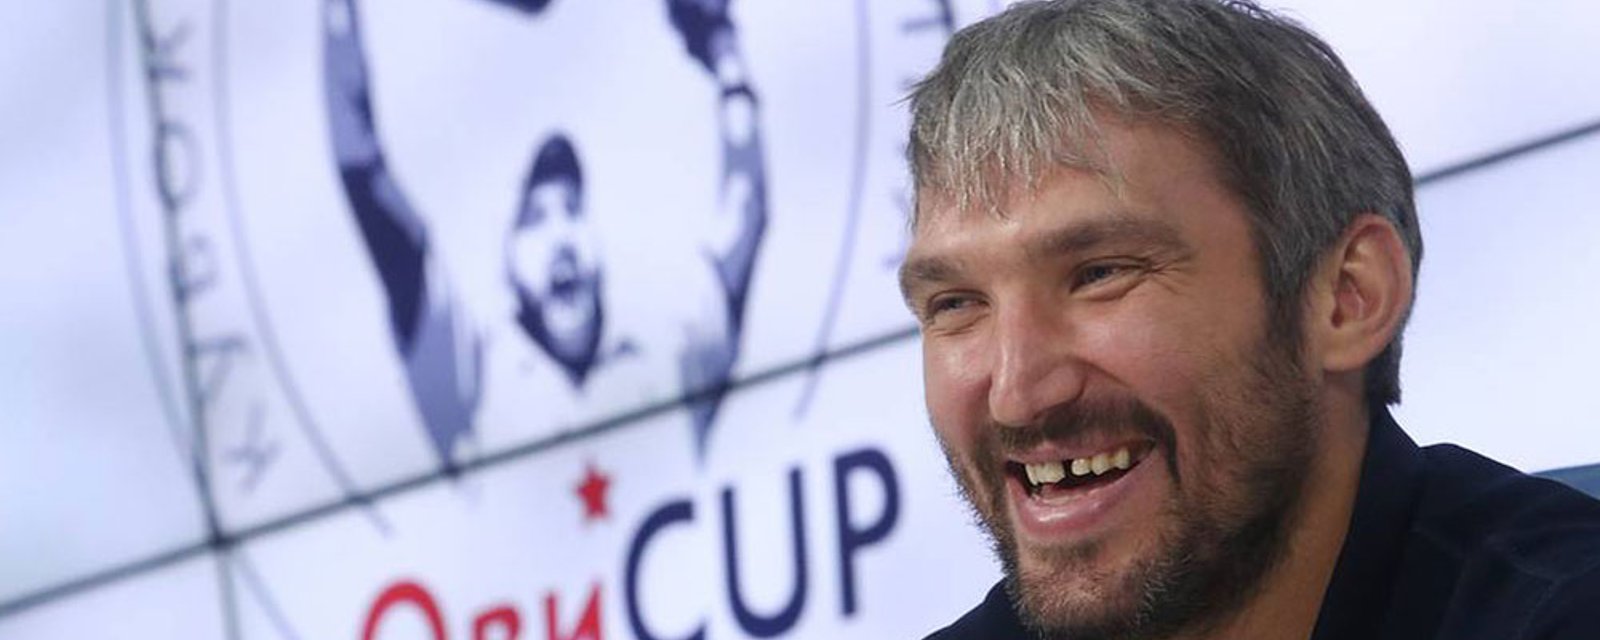 Ovechkin shocks fans, hints at retirement